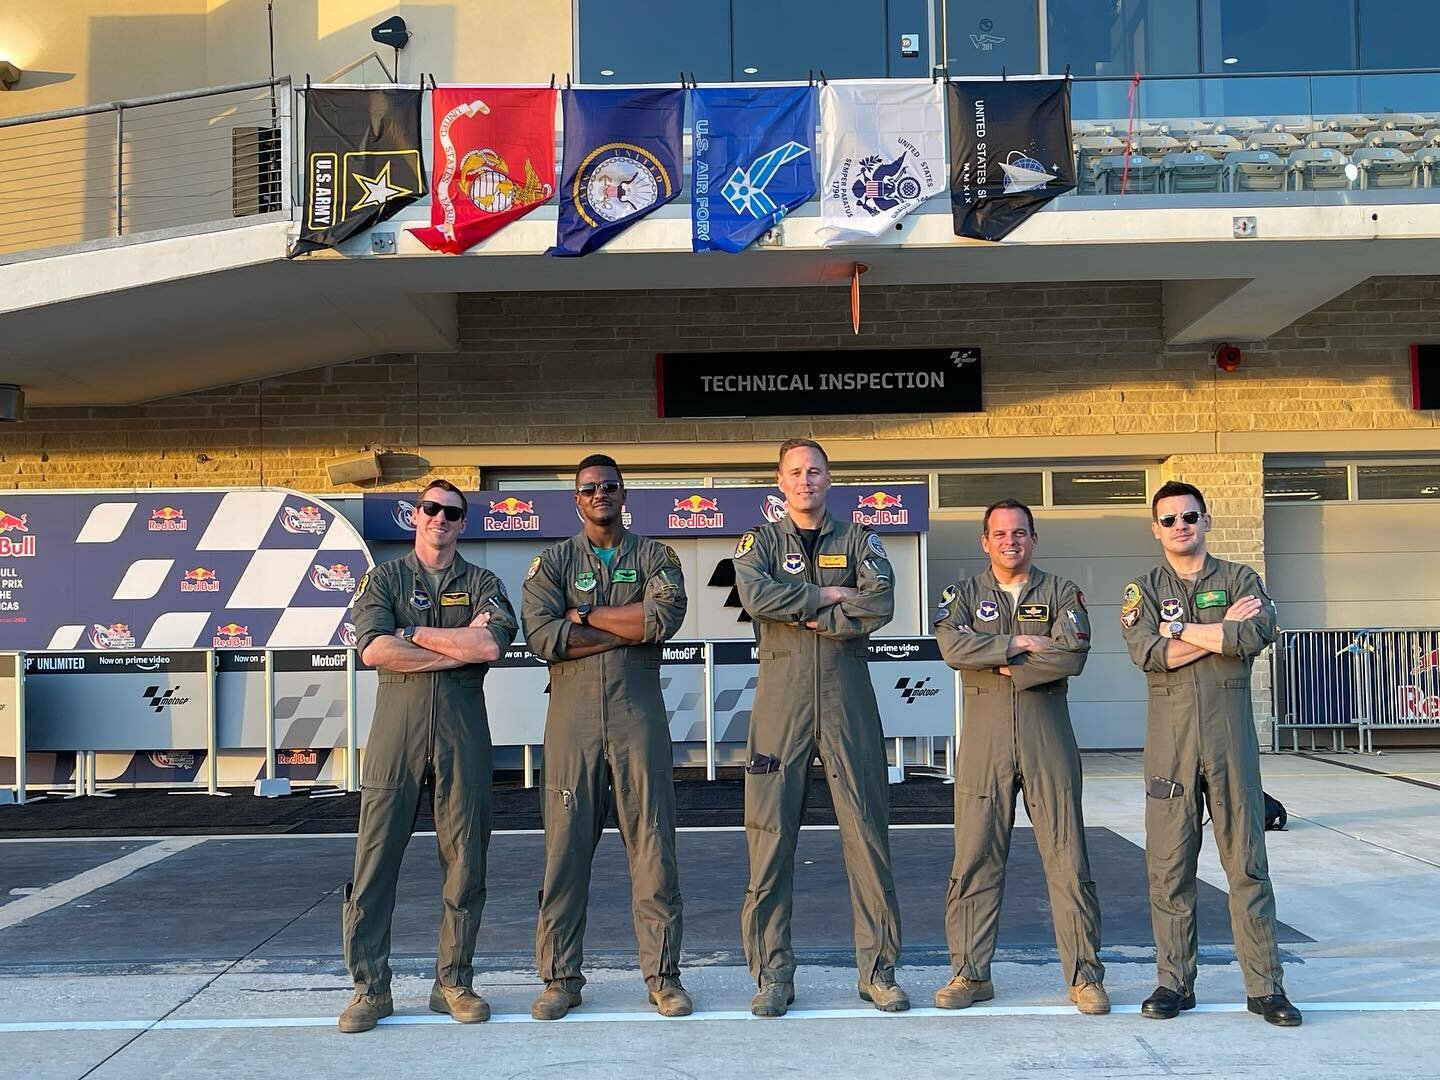 Our pilots are ready for tomorrow&rsquo;s flyover. Are y&rsquo;all ready for race day?